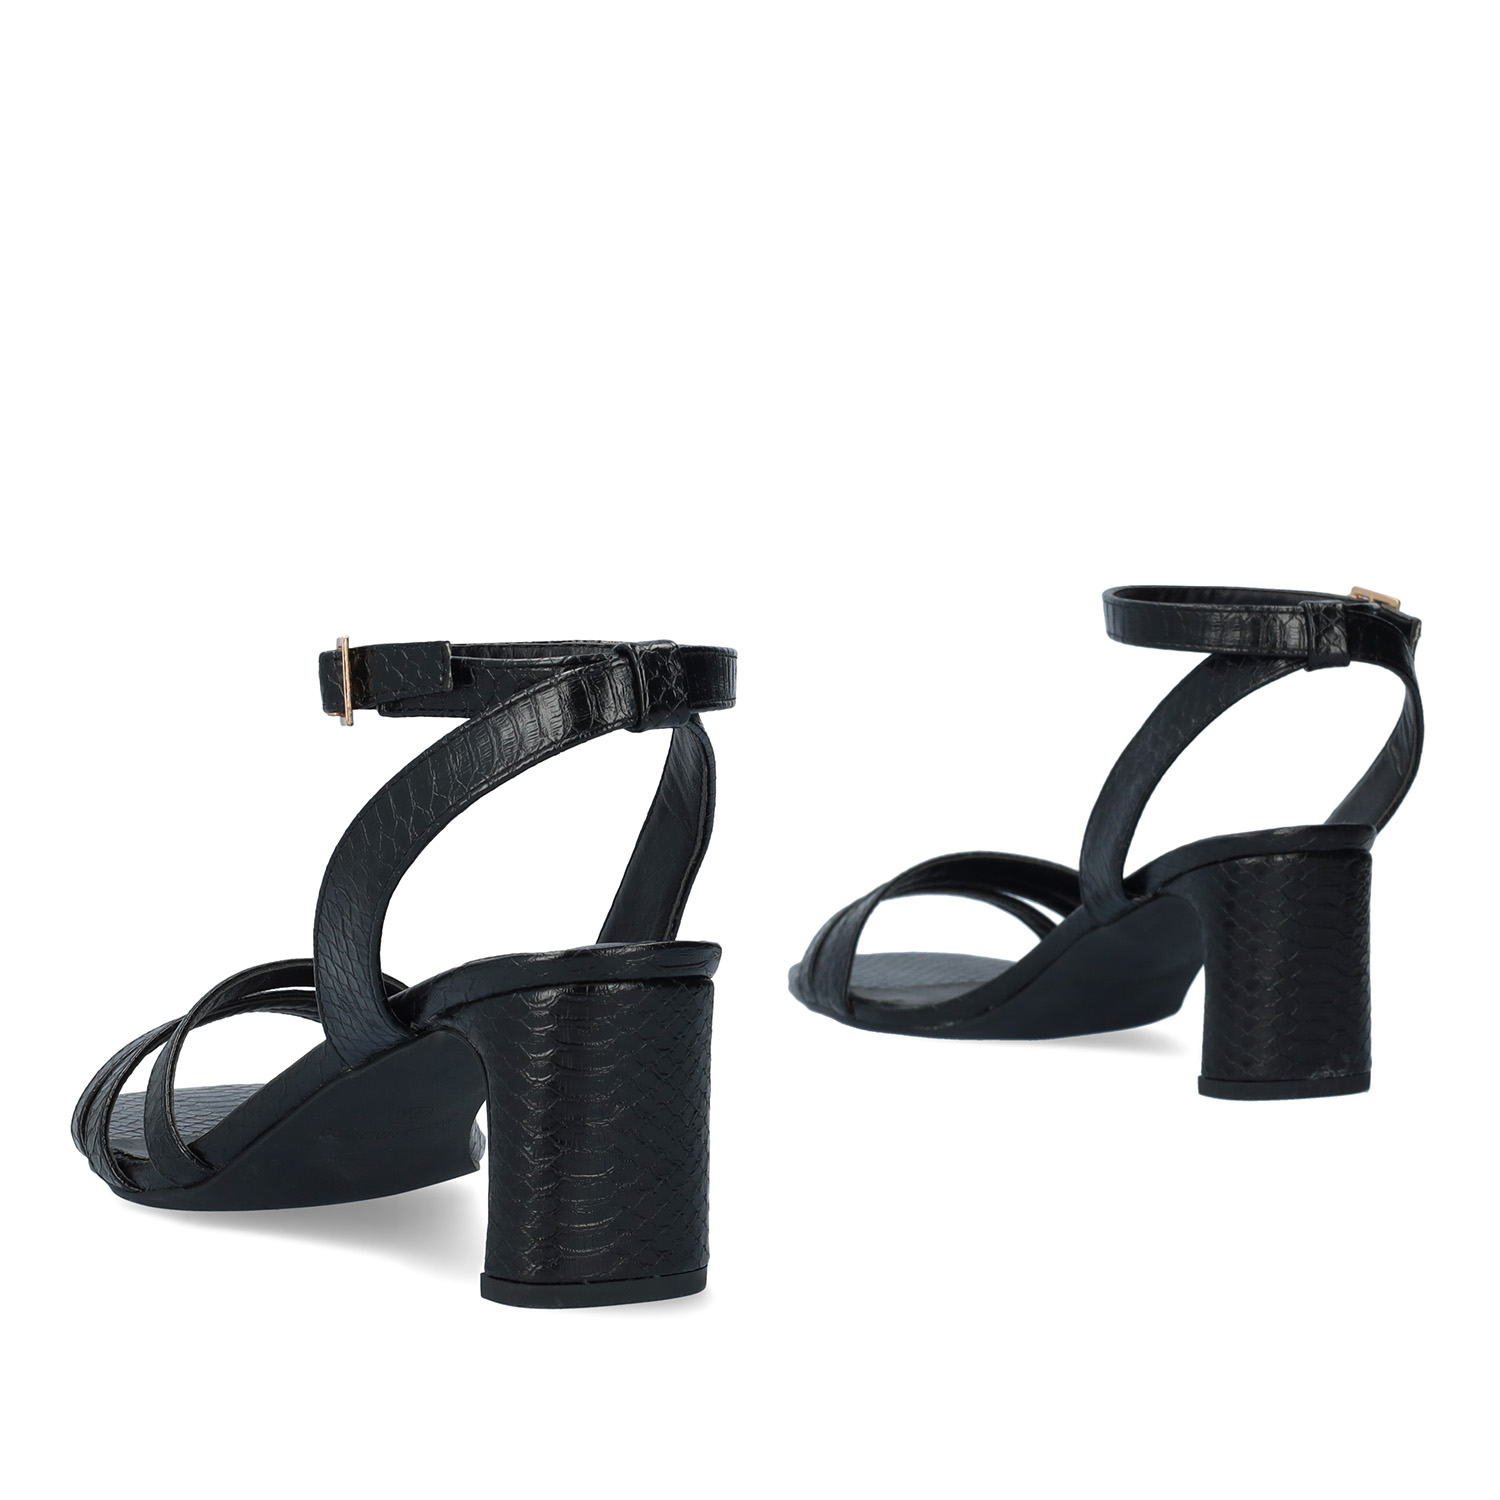 Soft Snake black coloured sandals with a thin block heel 